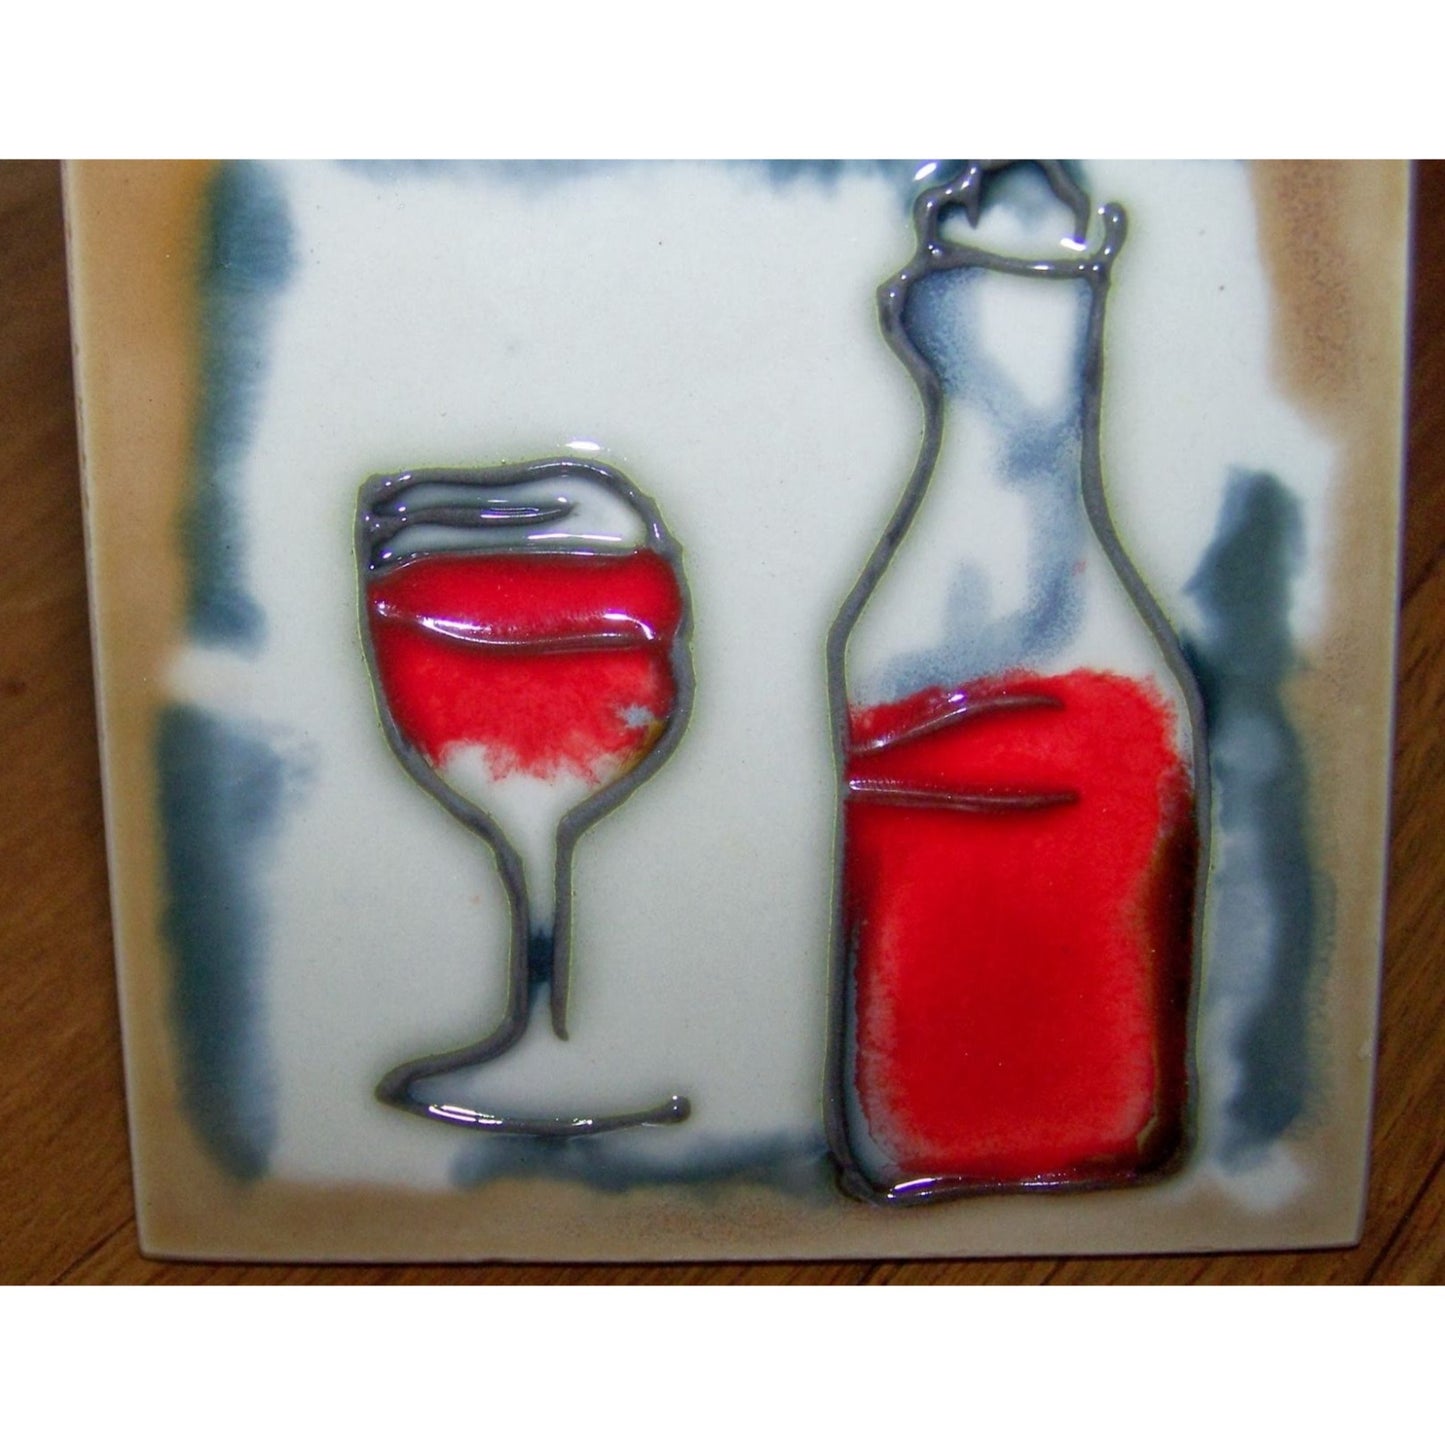 Art Tile 4" x 4" Muddy Waters Hand Painted 7A070 ArtWork on Tile Wine 5 Wine Glass and Bottle 1/2 " Ceramic Tile and backing